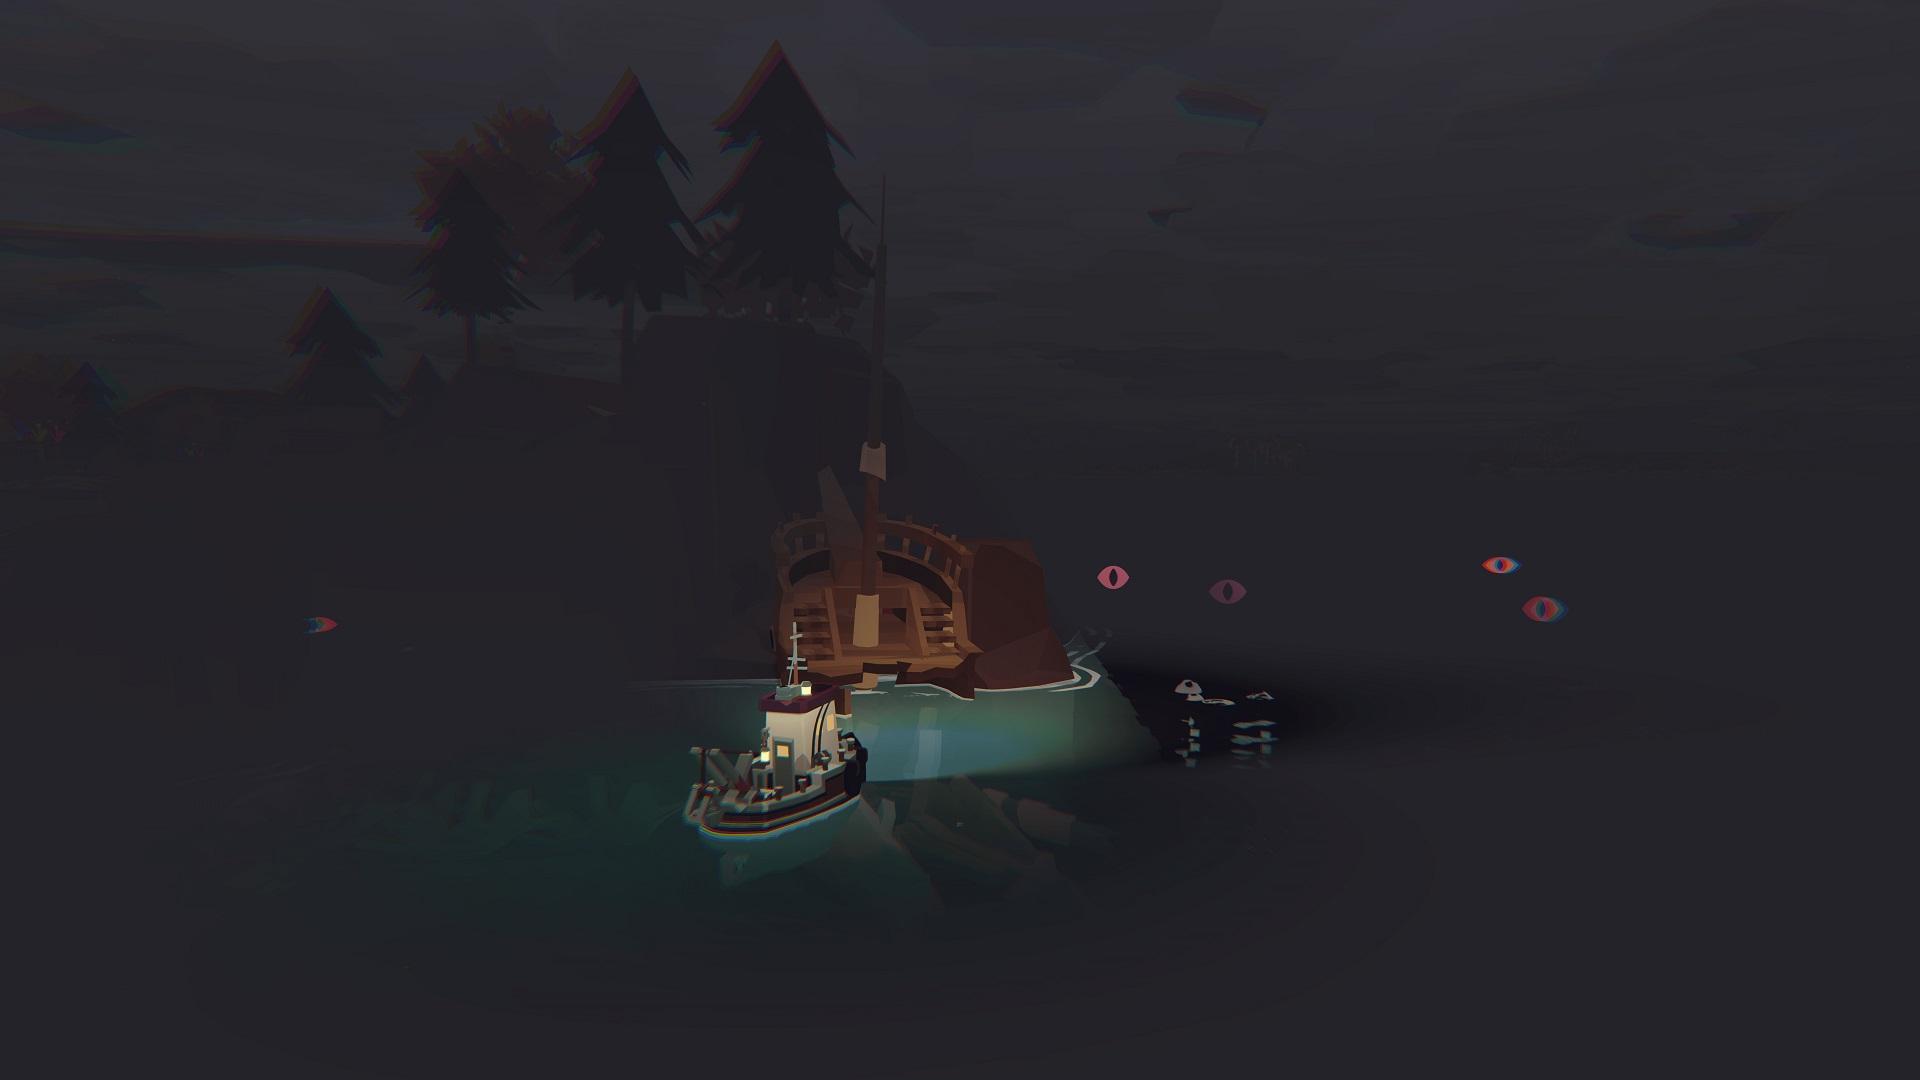 'Dredge' A boat surrounded by red eyes nearby a shipwreck at night.